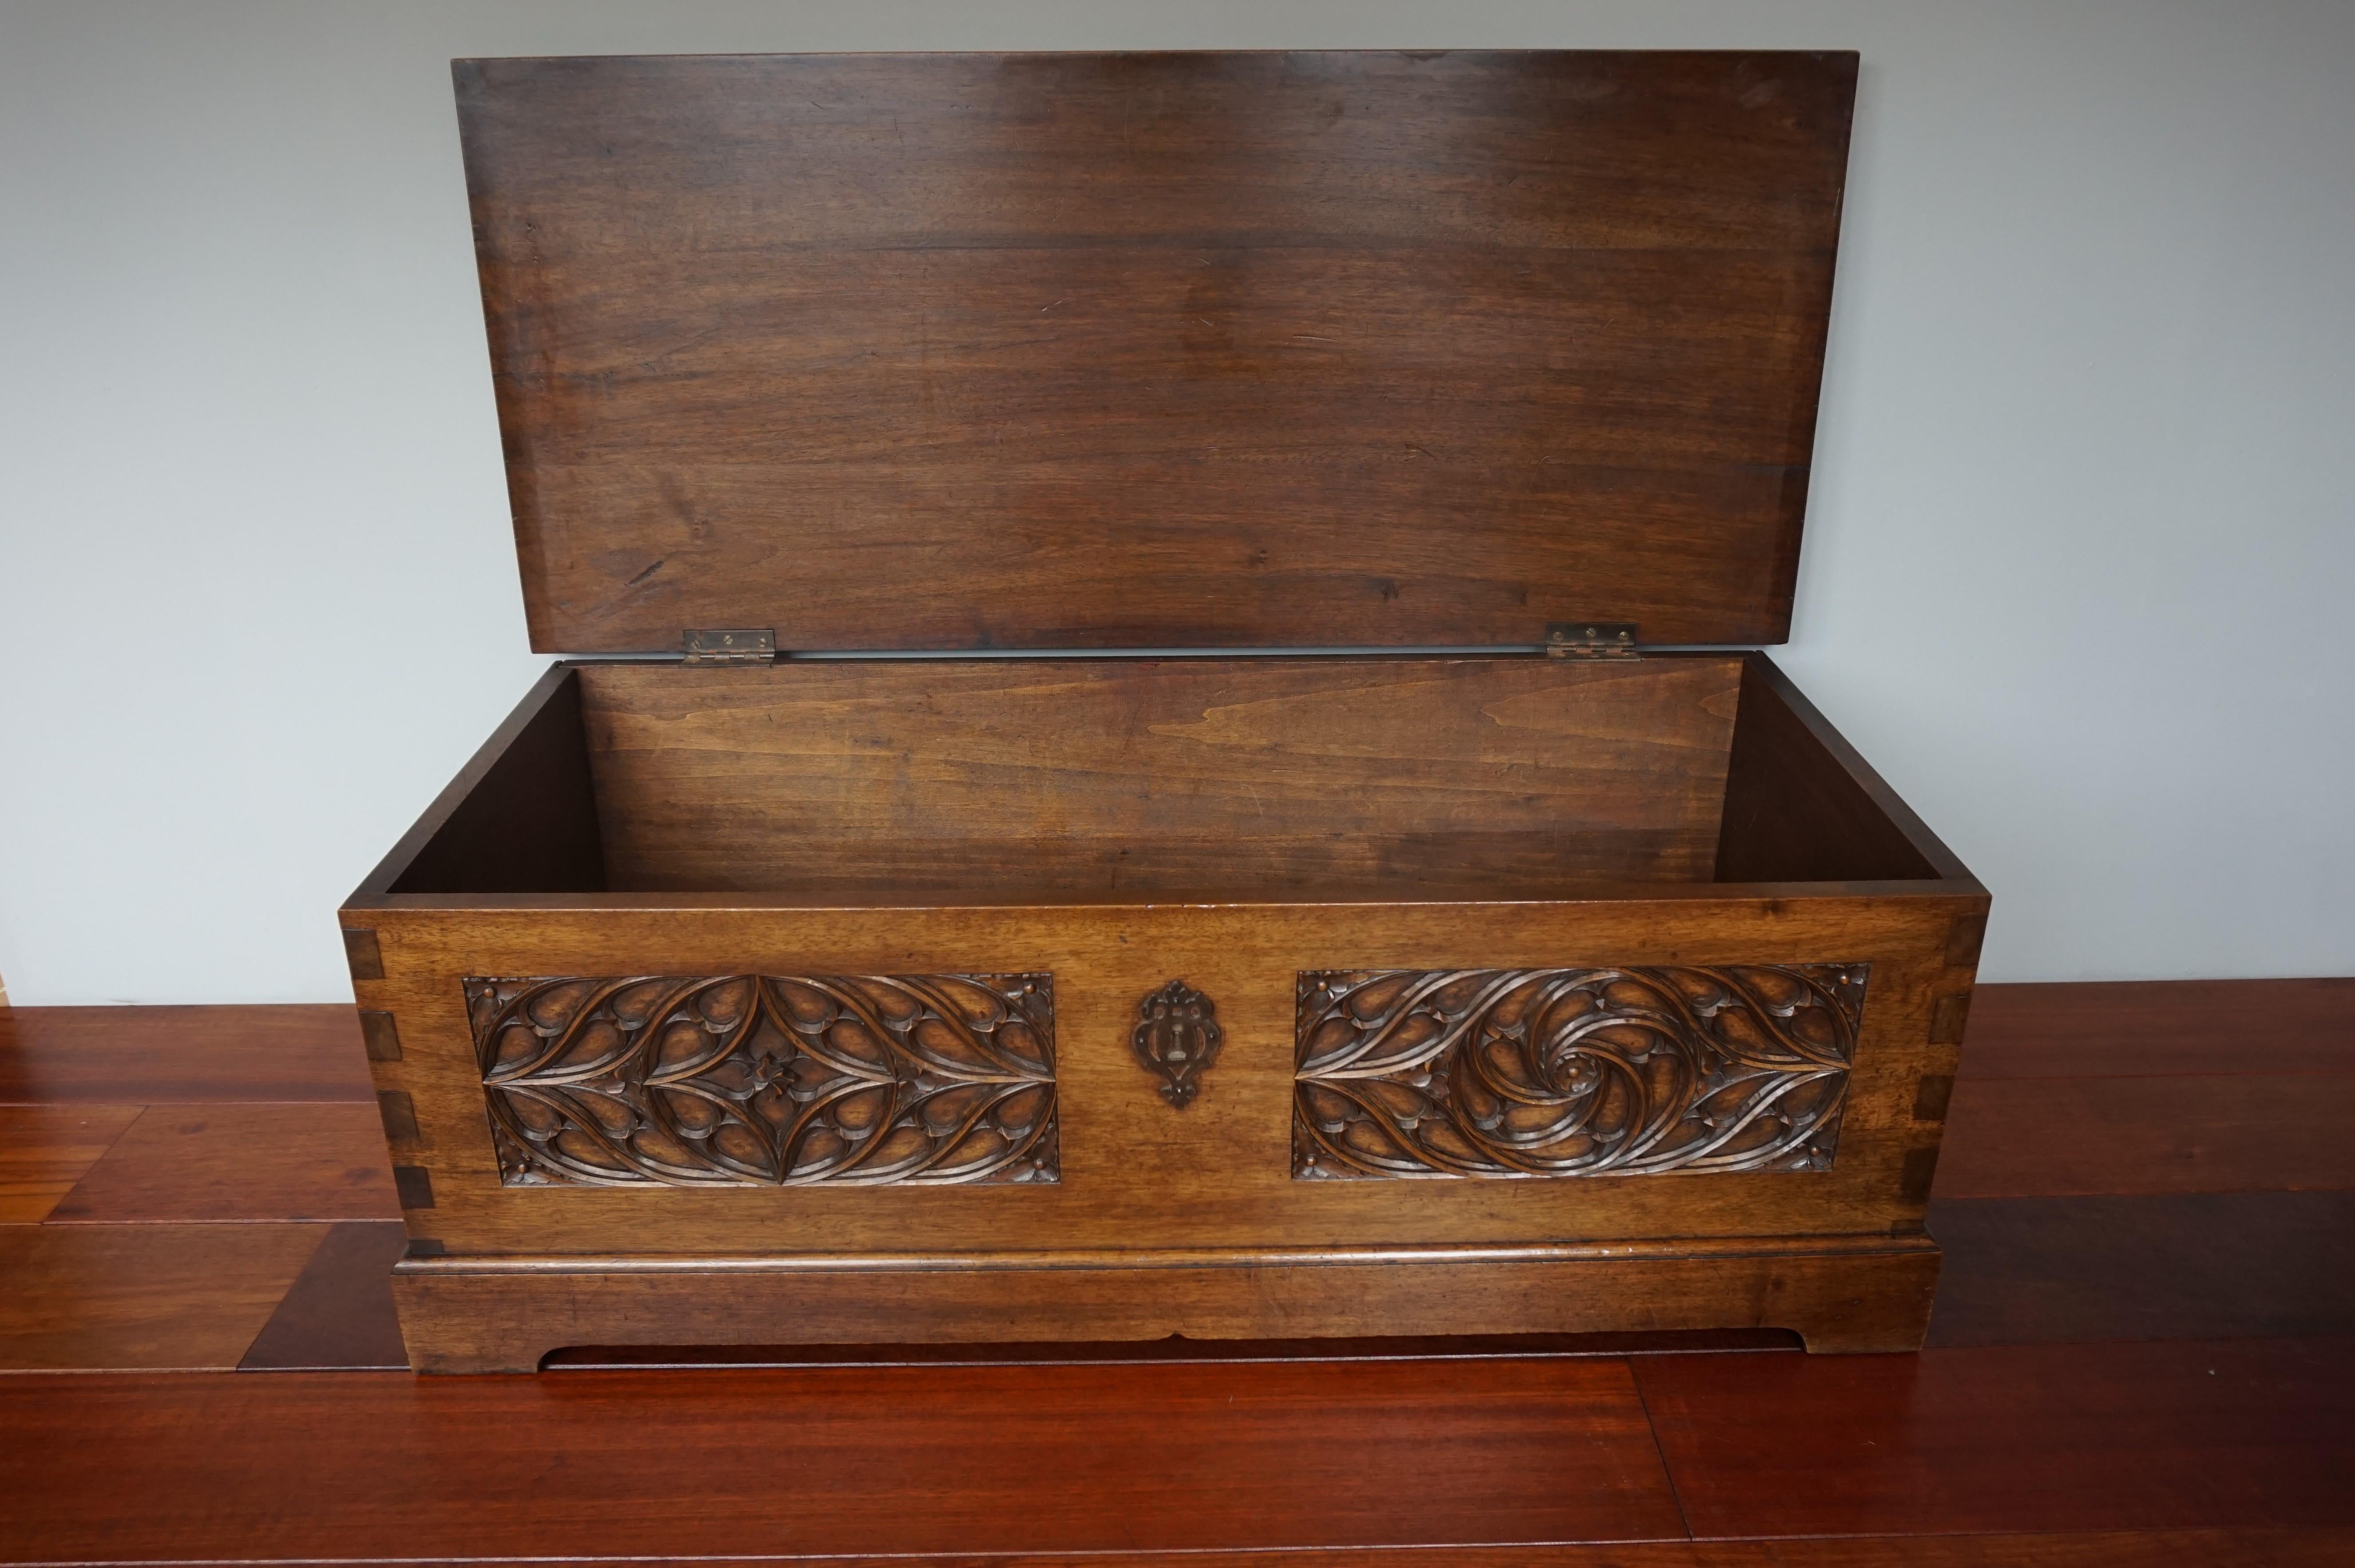 European Stunning Gothic Revival Hand Carved Walnut Blanket Chest / Trunk w. Warm Patina